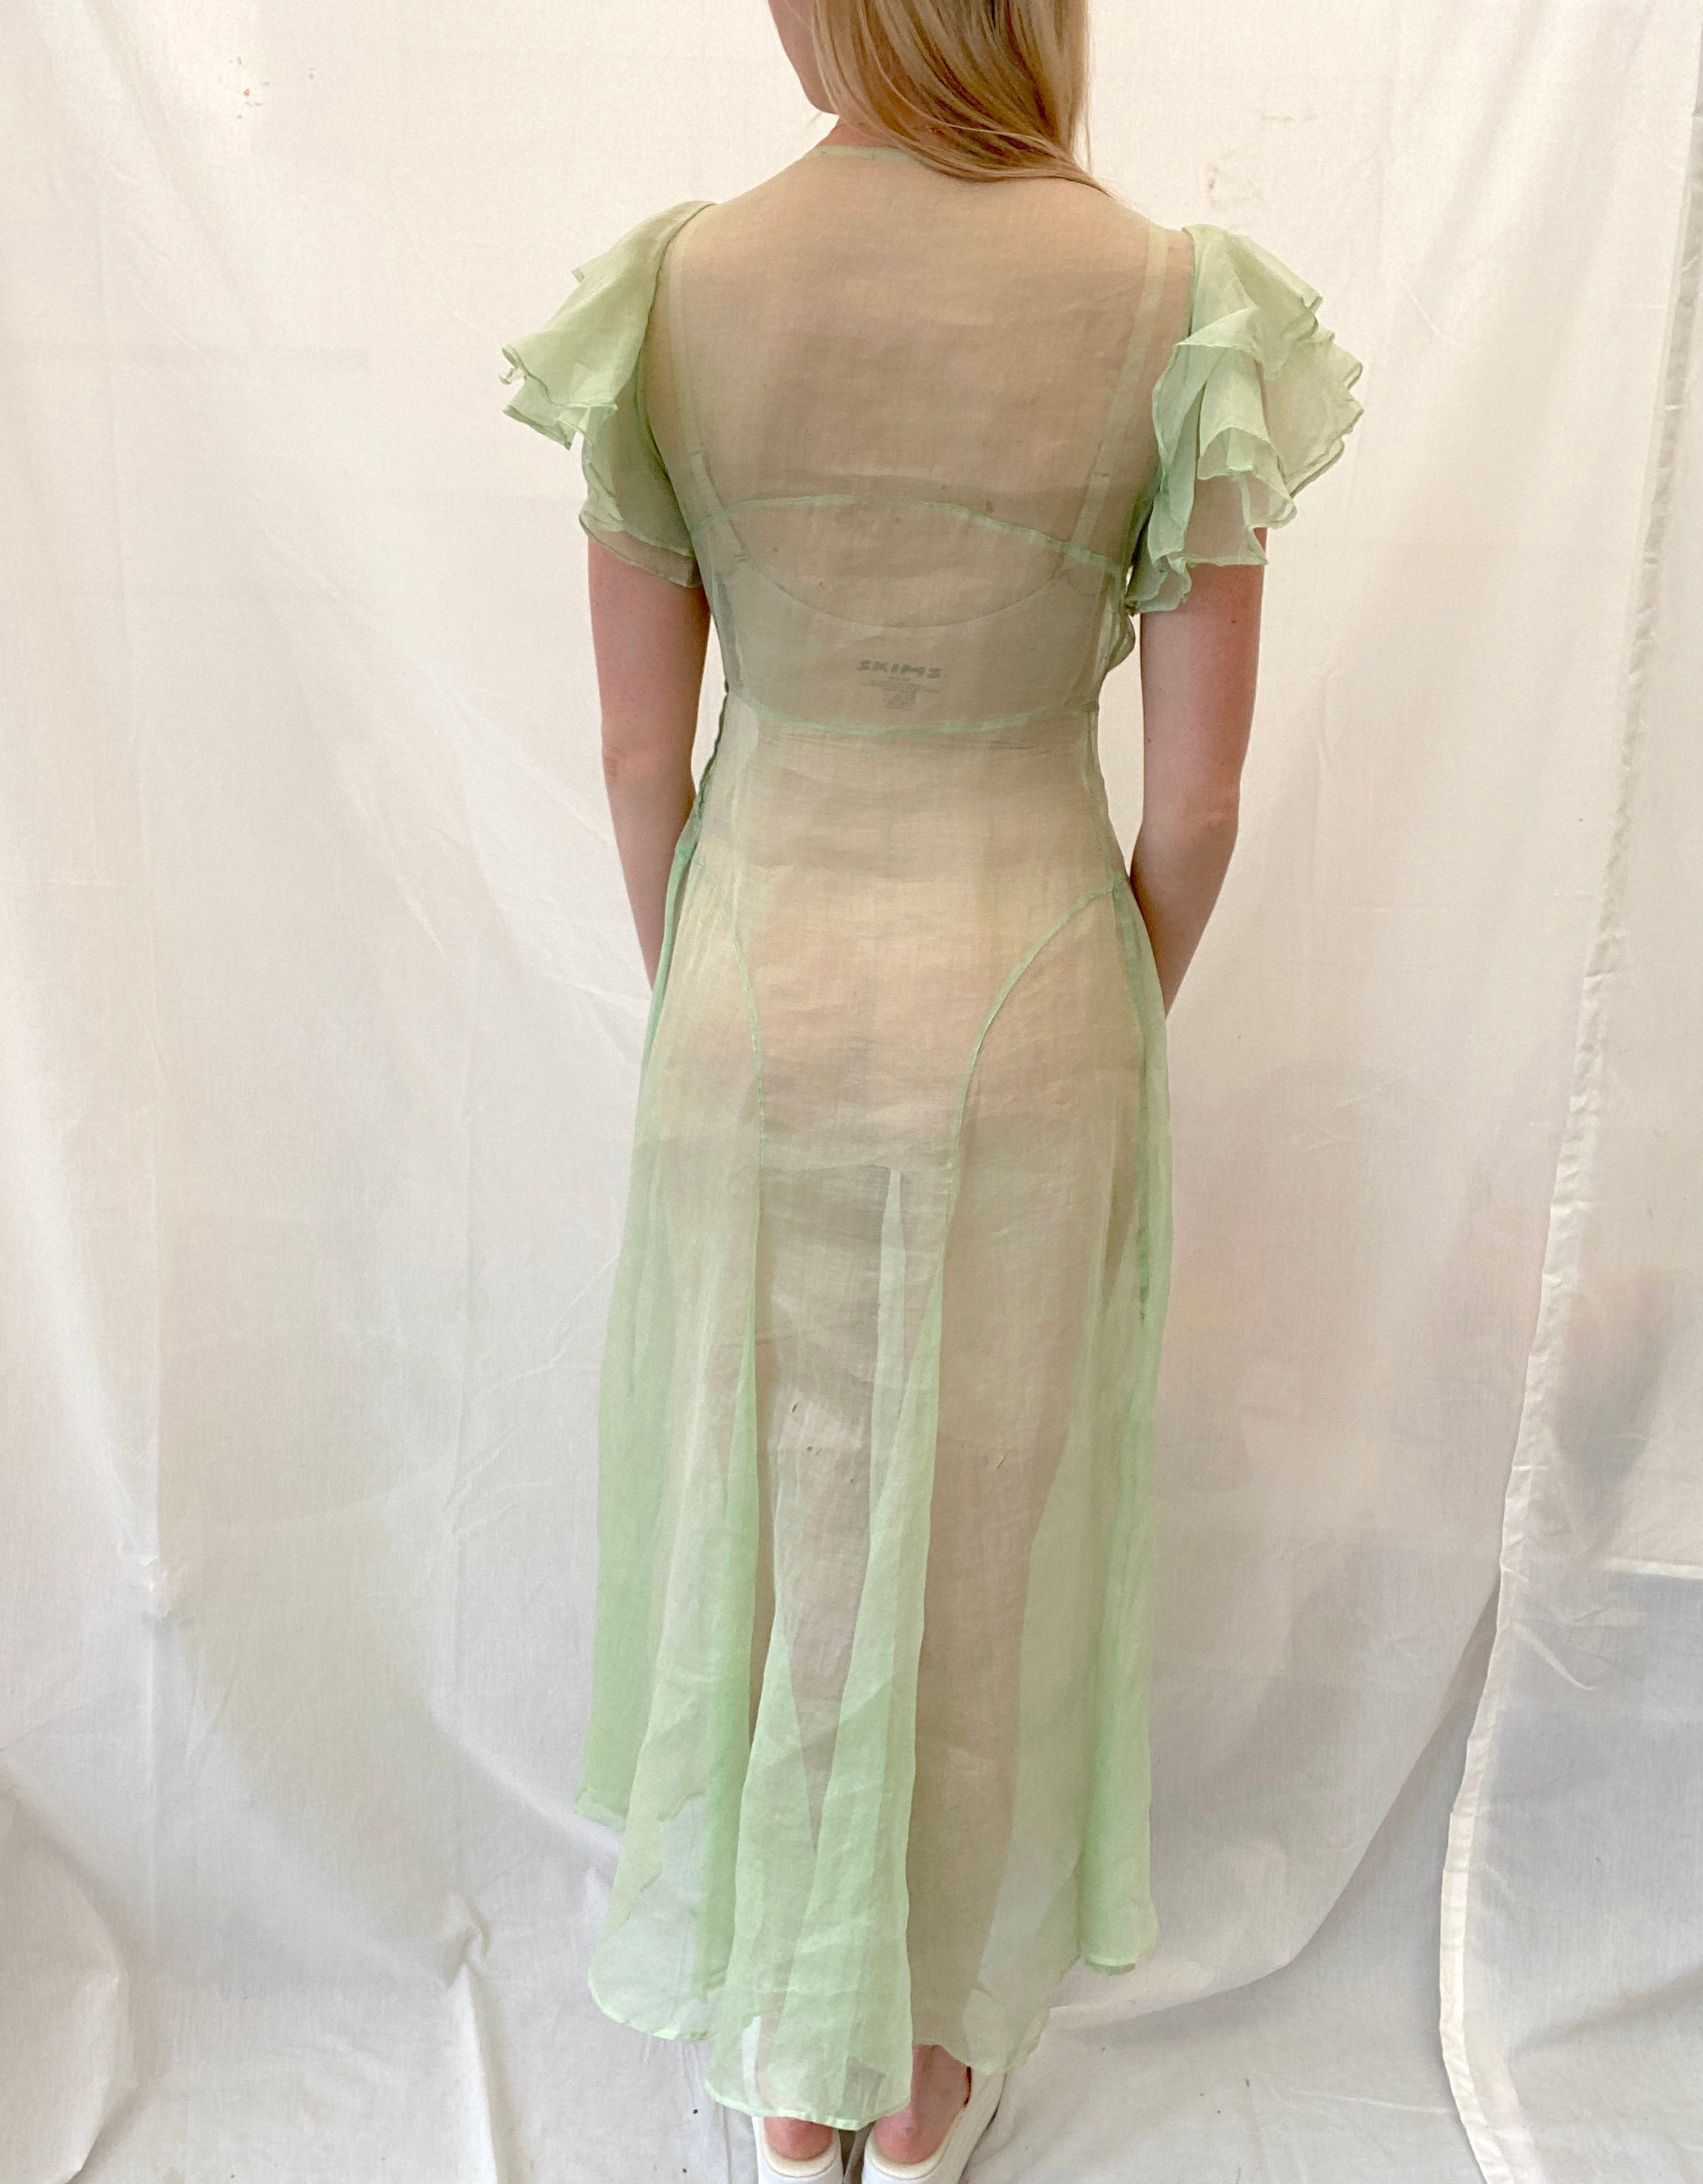 1930's Pale Green Cotton Organza Dress with Ruffle Sleeve